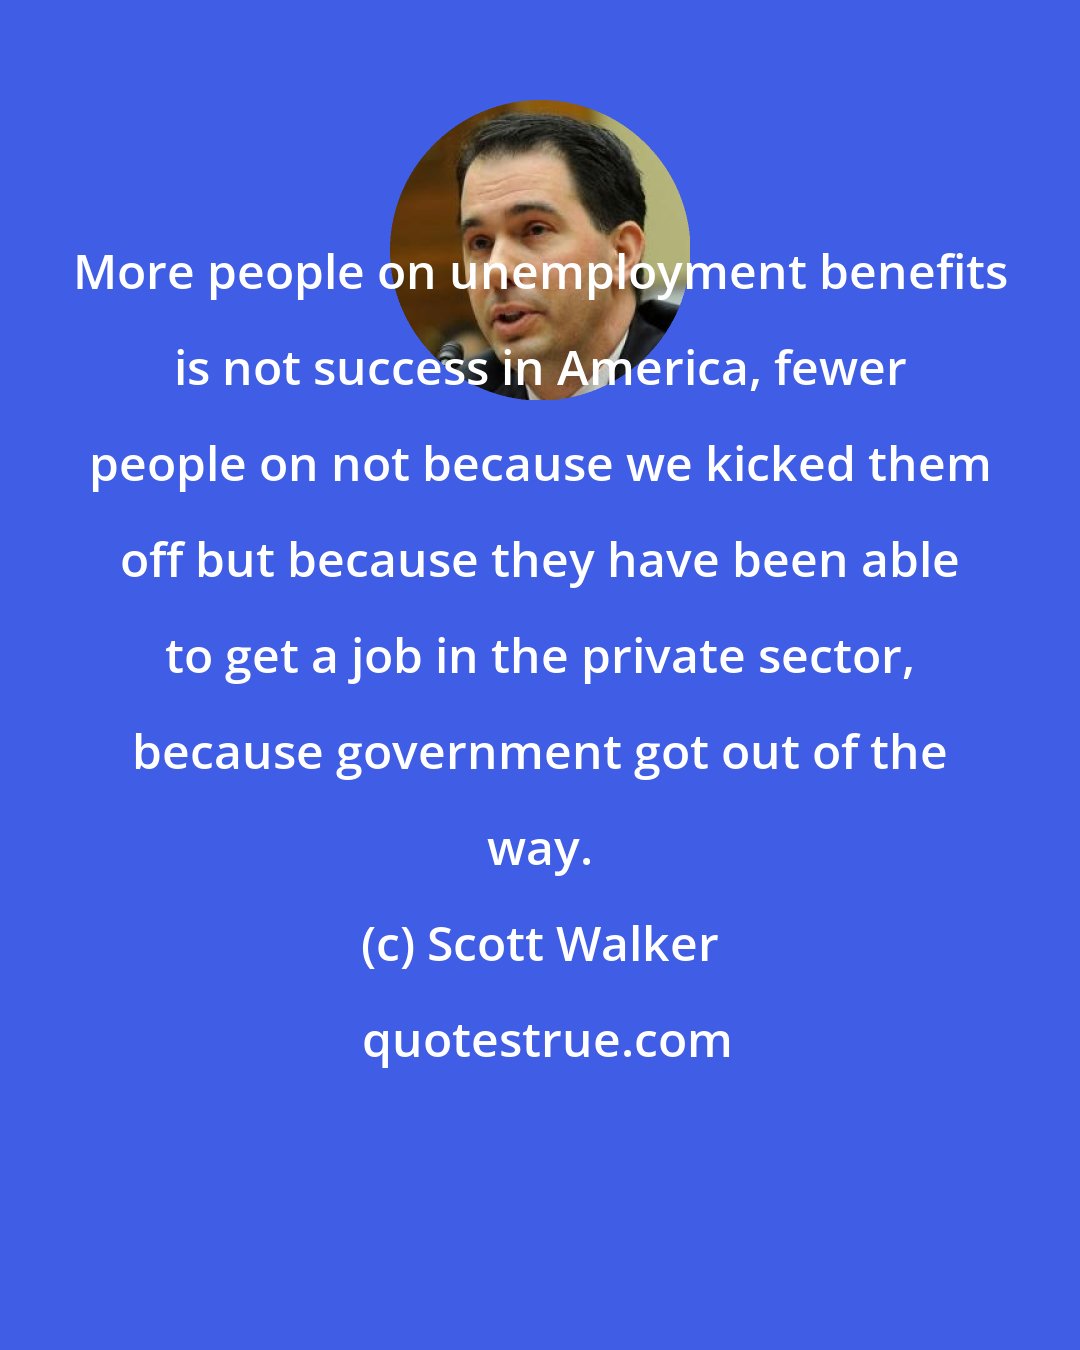 Scott Walker: More people on unemployment benefits is not success in America, fewer people on not because we kicked them off but because they have been able to get a job in the private sector, because government got out of the way.